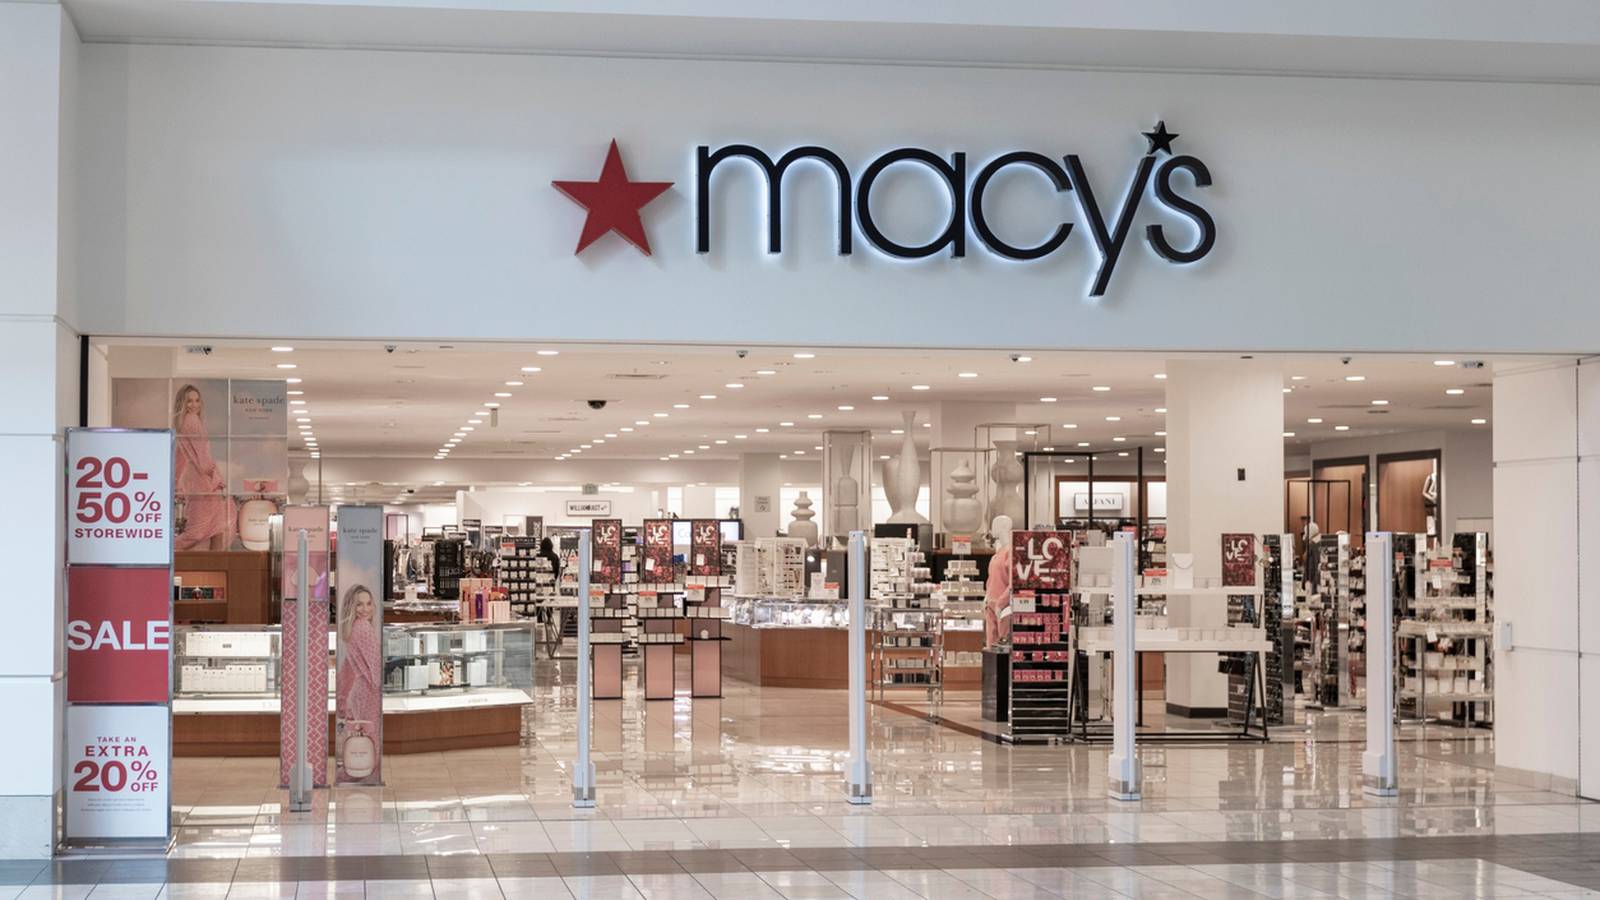 Macy’s to downsize; 150 stores are closing KIRO 7 News Seattle